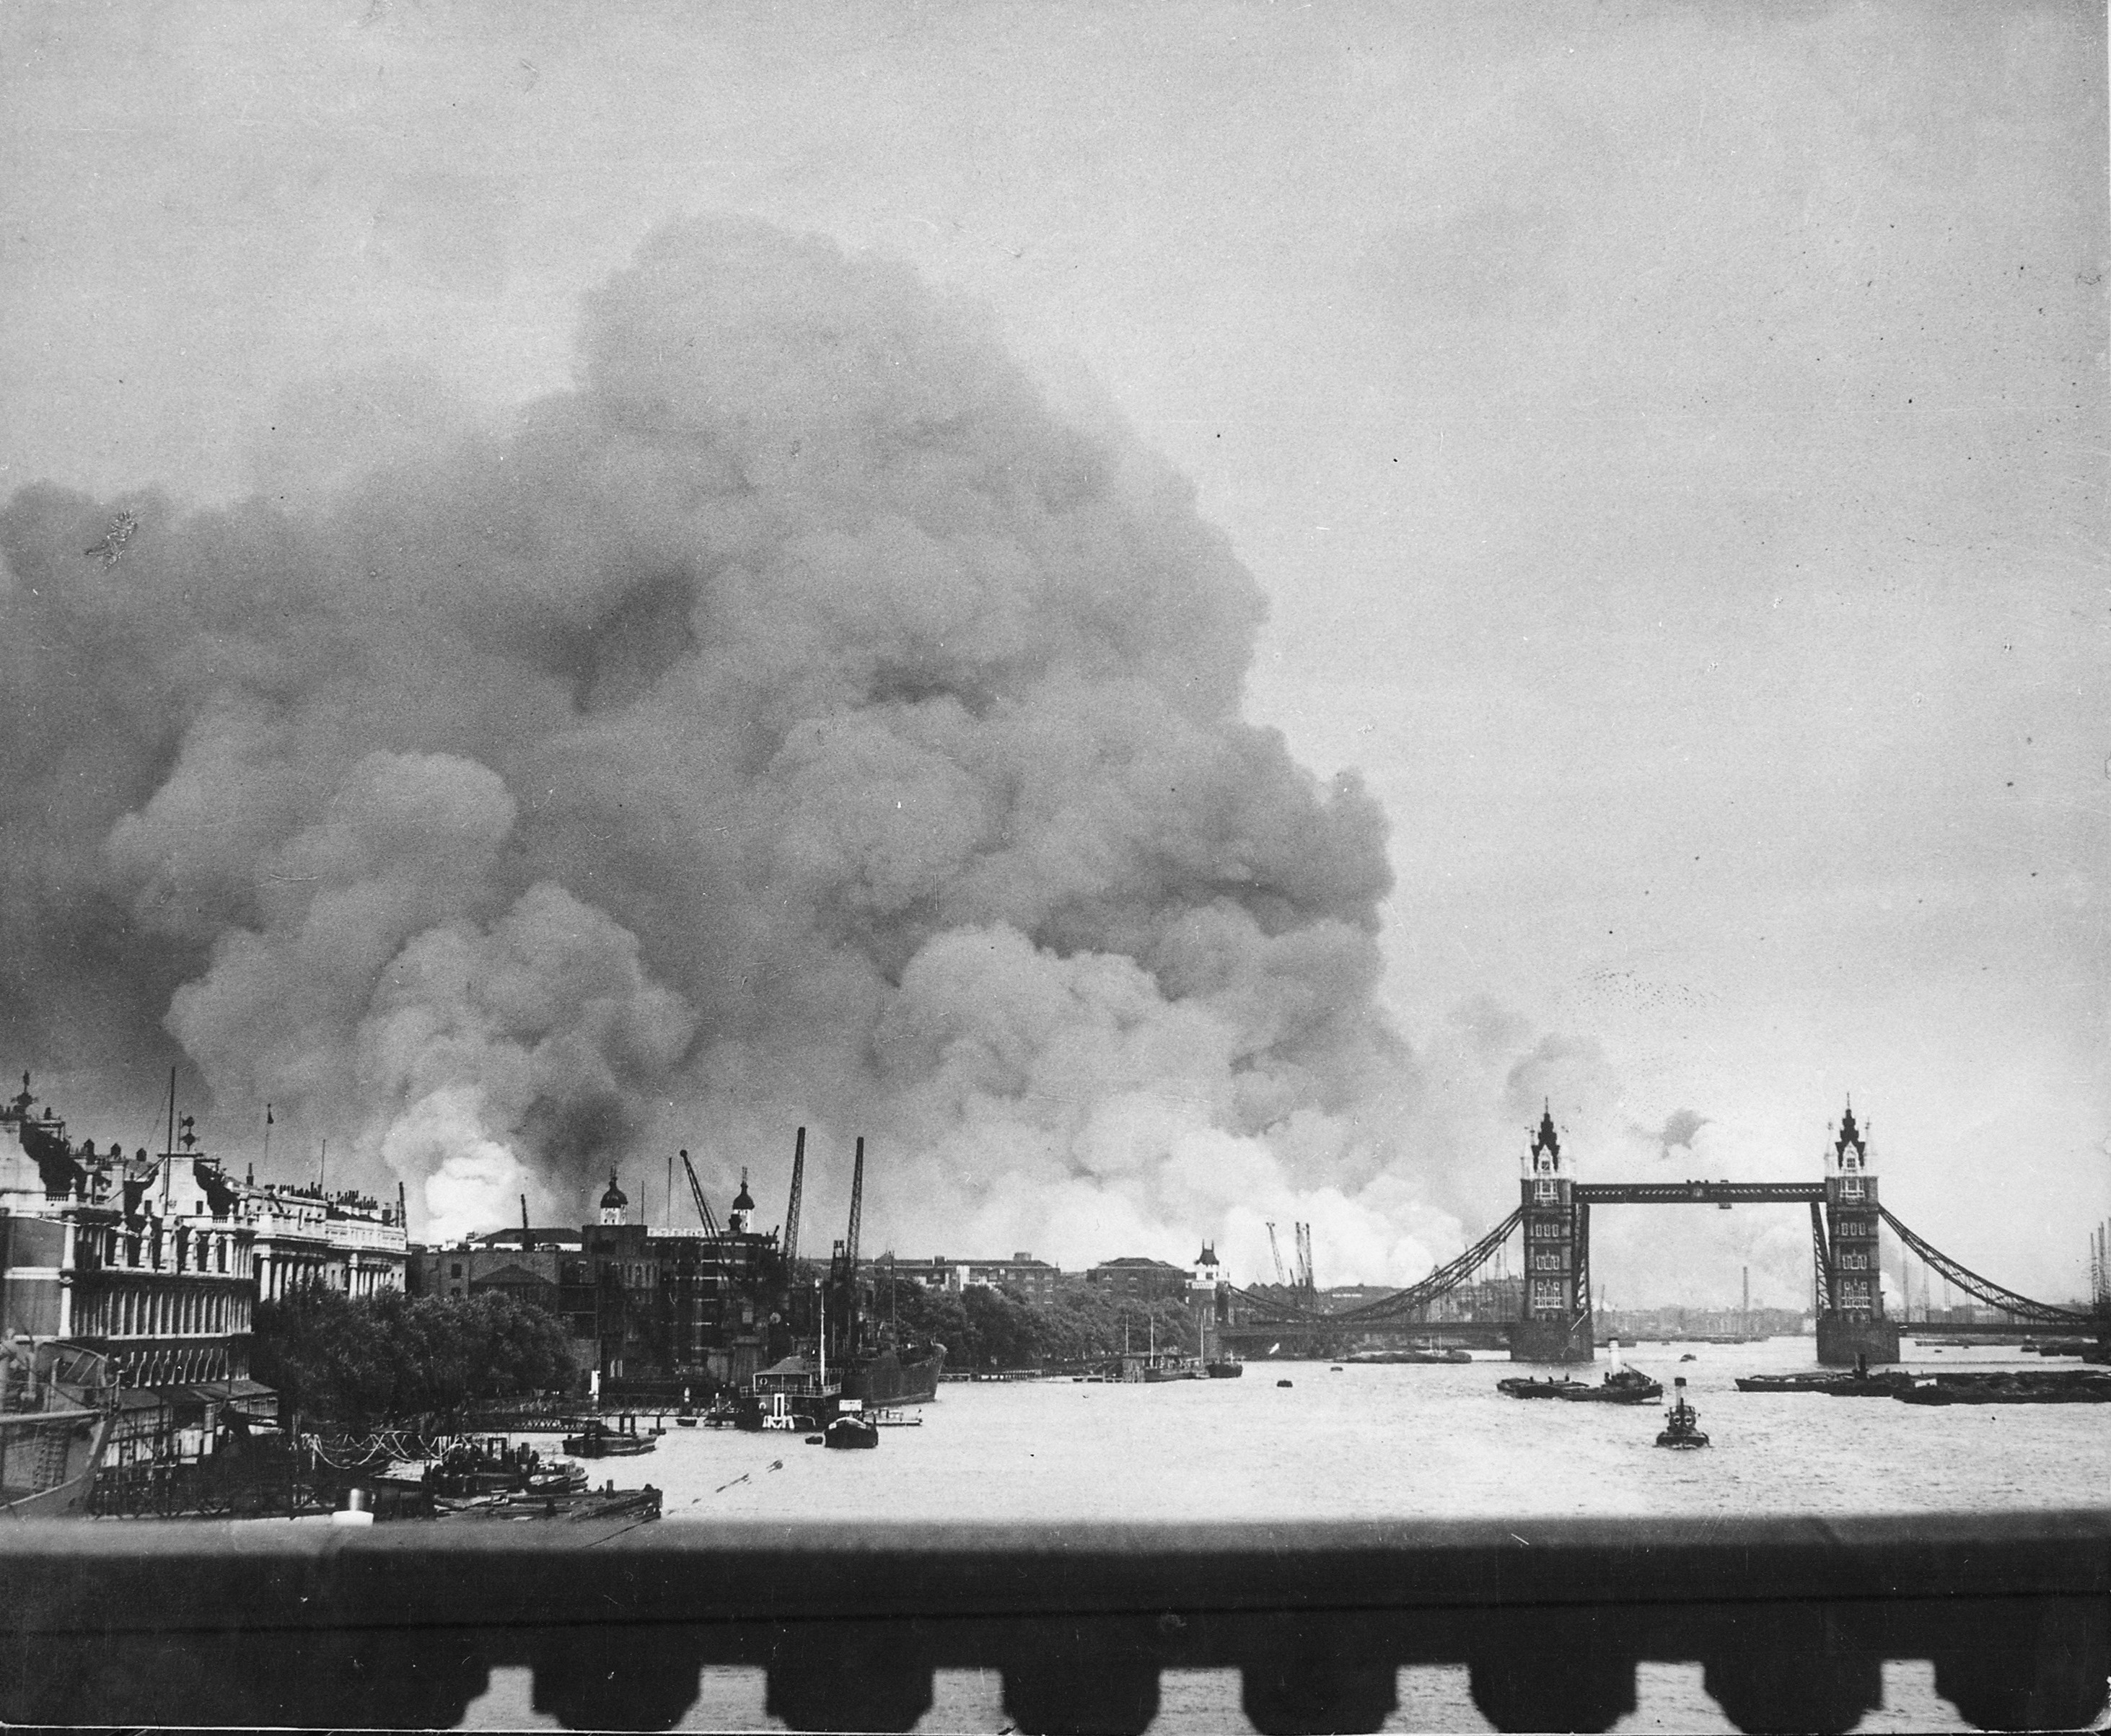 Smoke rising from the Surrey Docks, London, England, United Kingdom, 8 Sep 1940, the morning after the opening night of “The Blitz” bombings as seen from London Bridge. Note Tower Bridge silhouetted against the smoke.